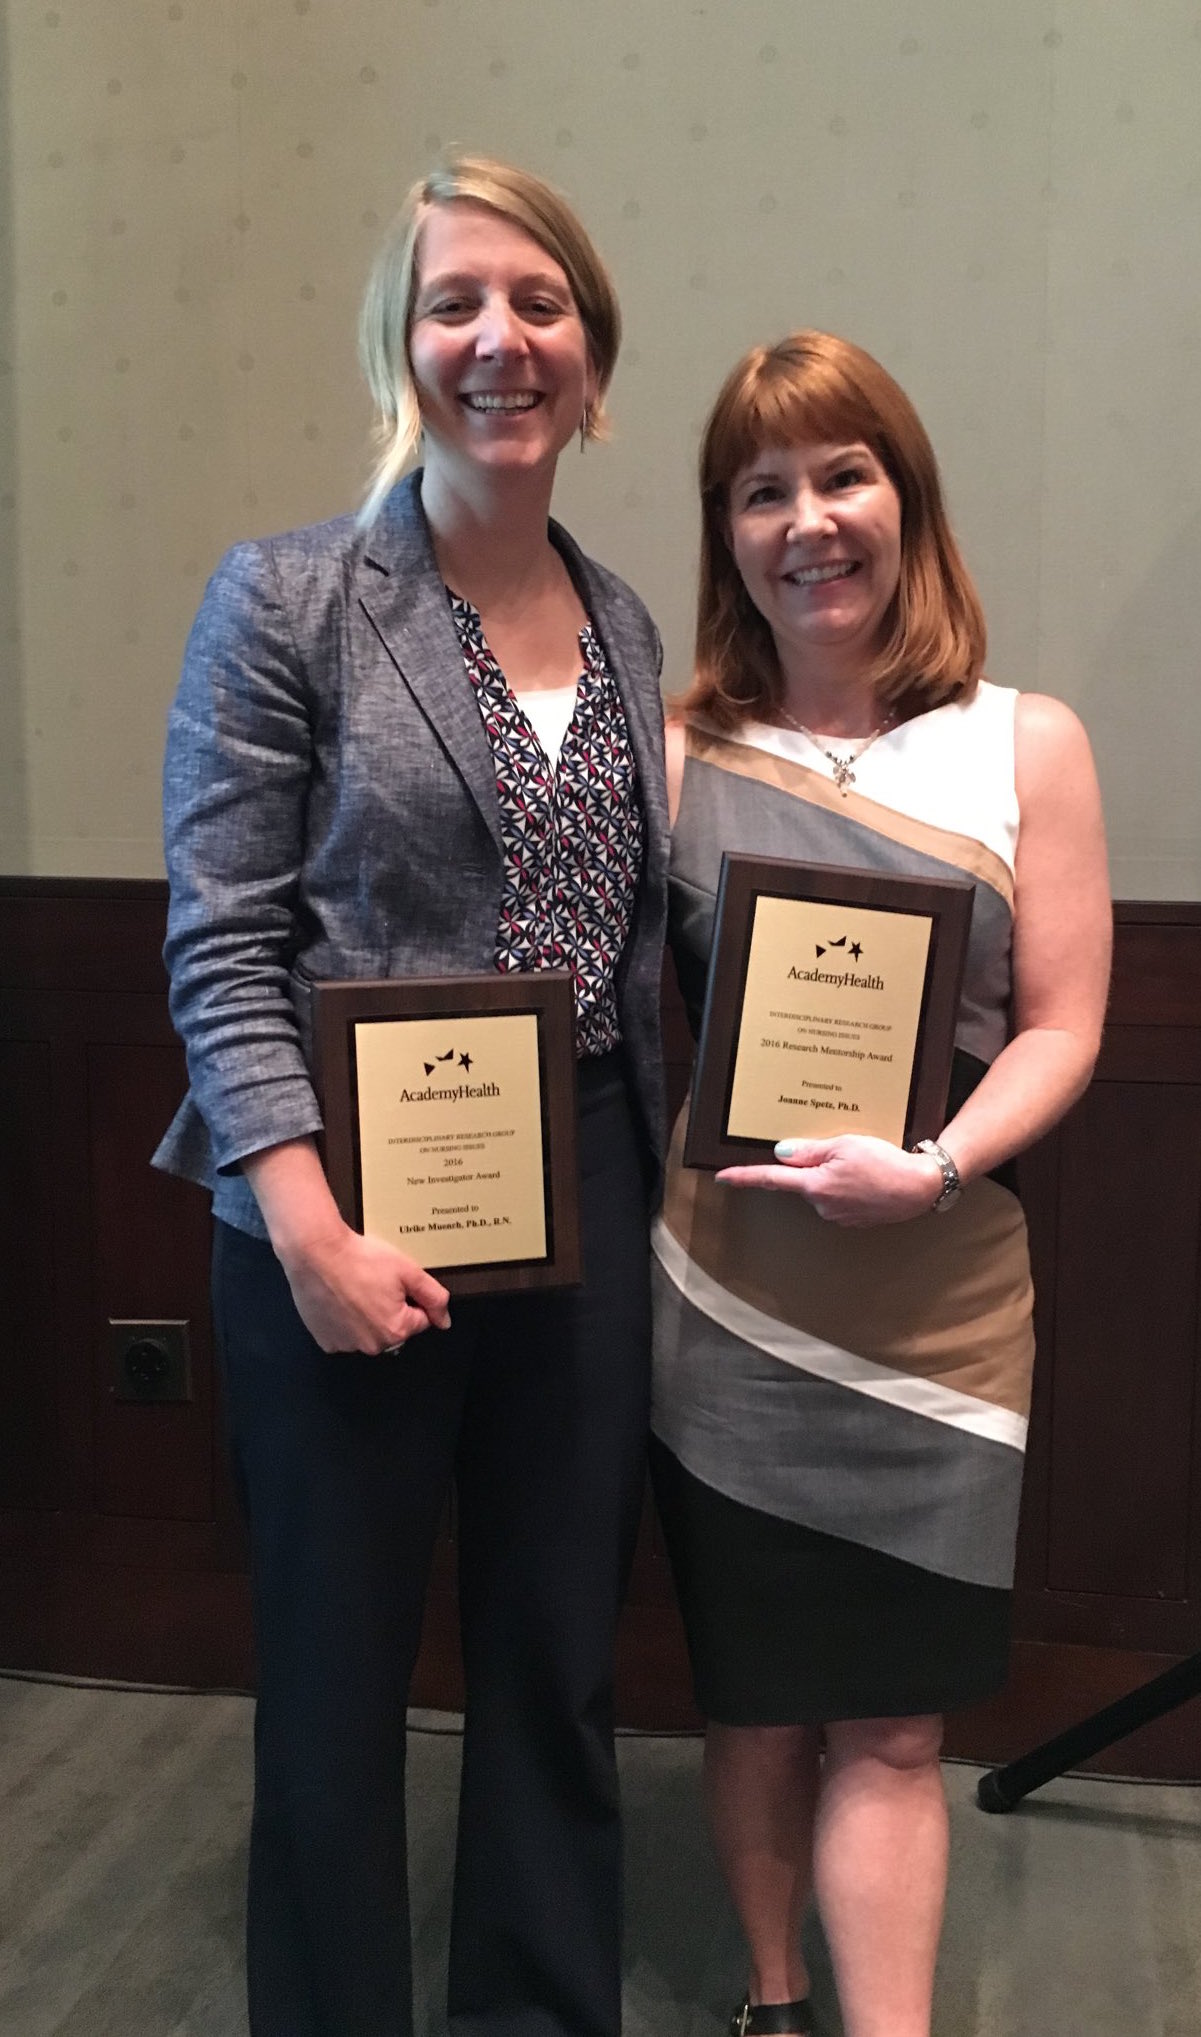 Ulrike Muench, RN, PhD, and Joanne Spetz, PhD, pose with their awards at the AHIRGNI Conference